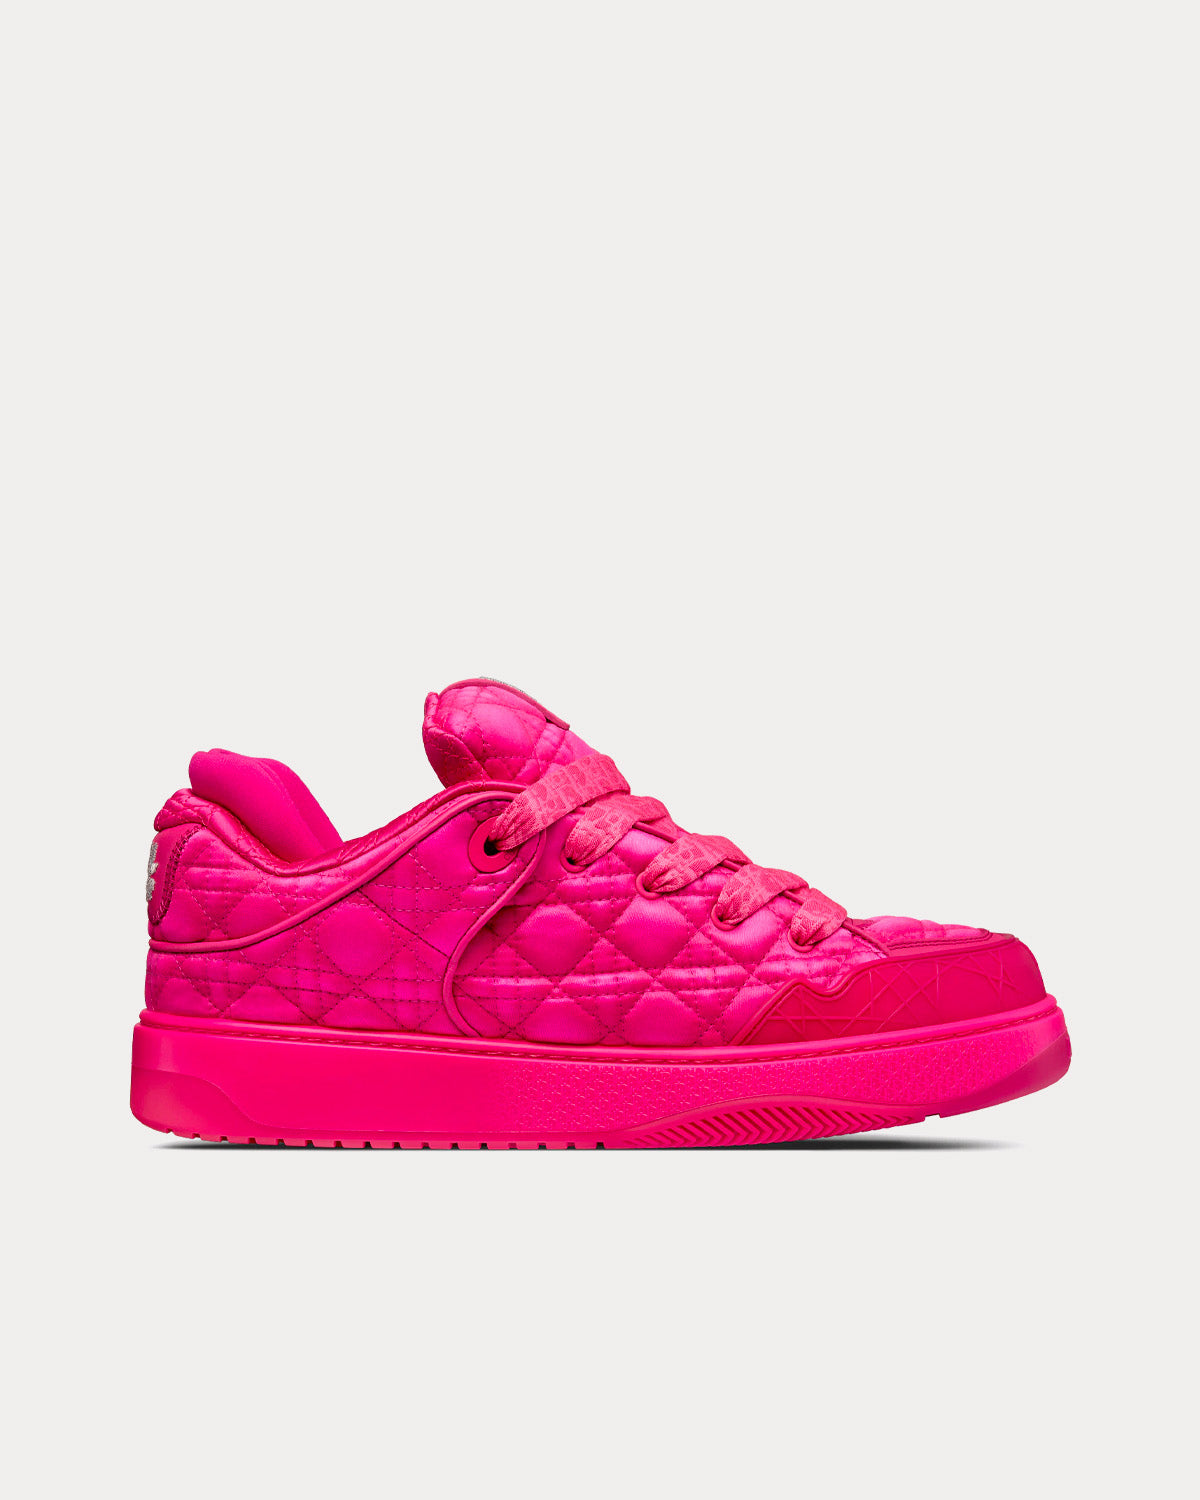 Dior x ERL - B9S Skater Limited And Numbered Edition Fuchsia Kumo Cannage Satin Low Top Sneakers